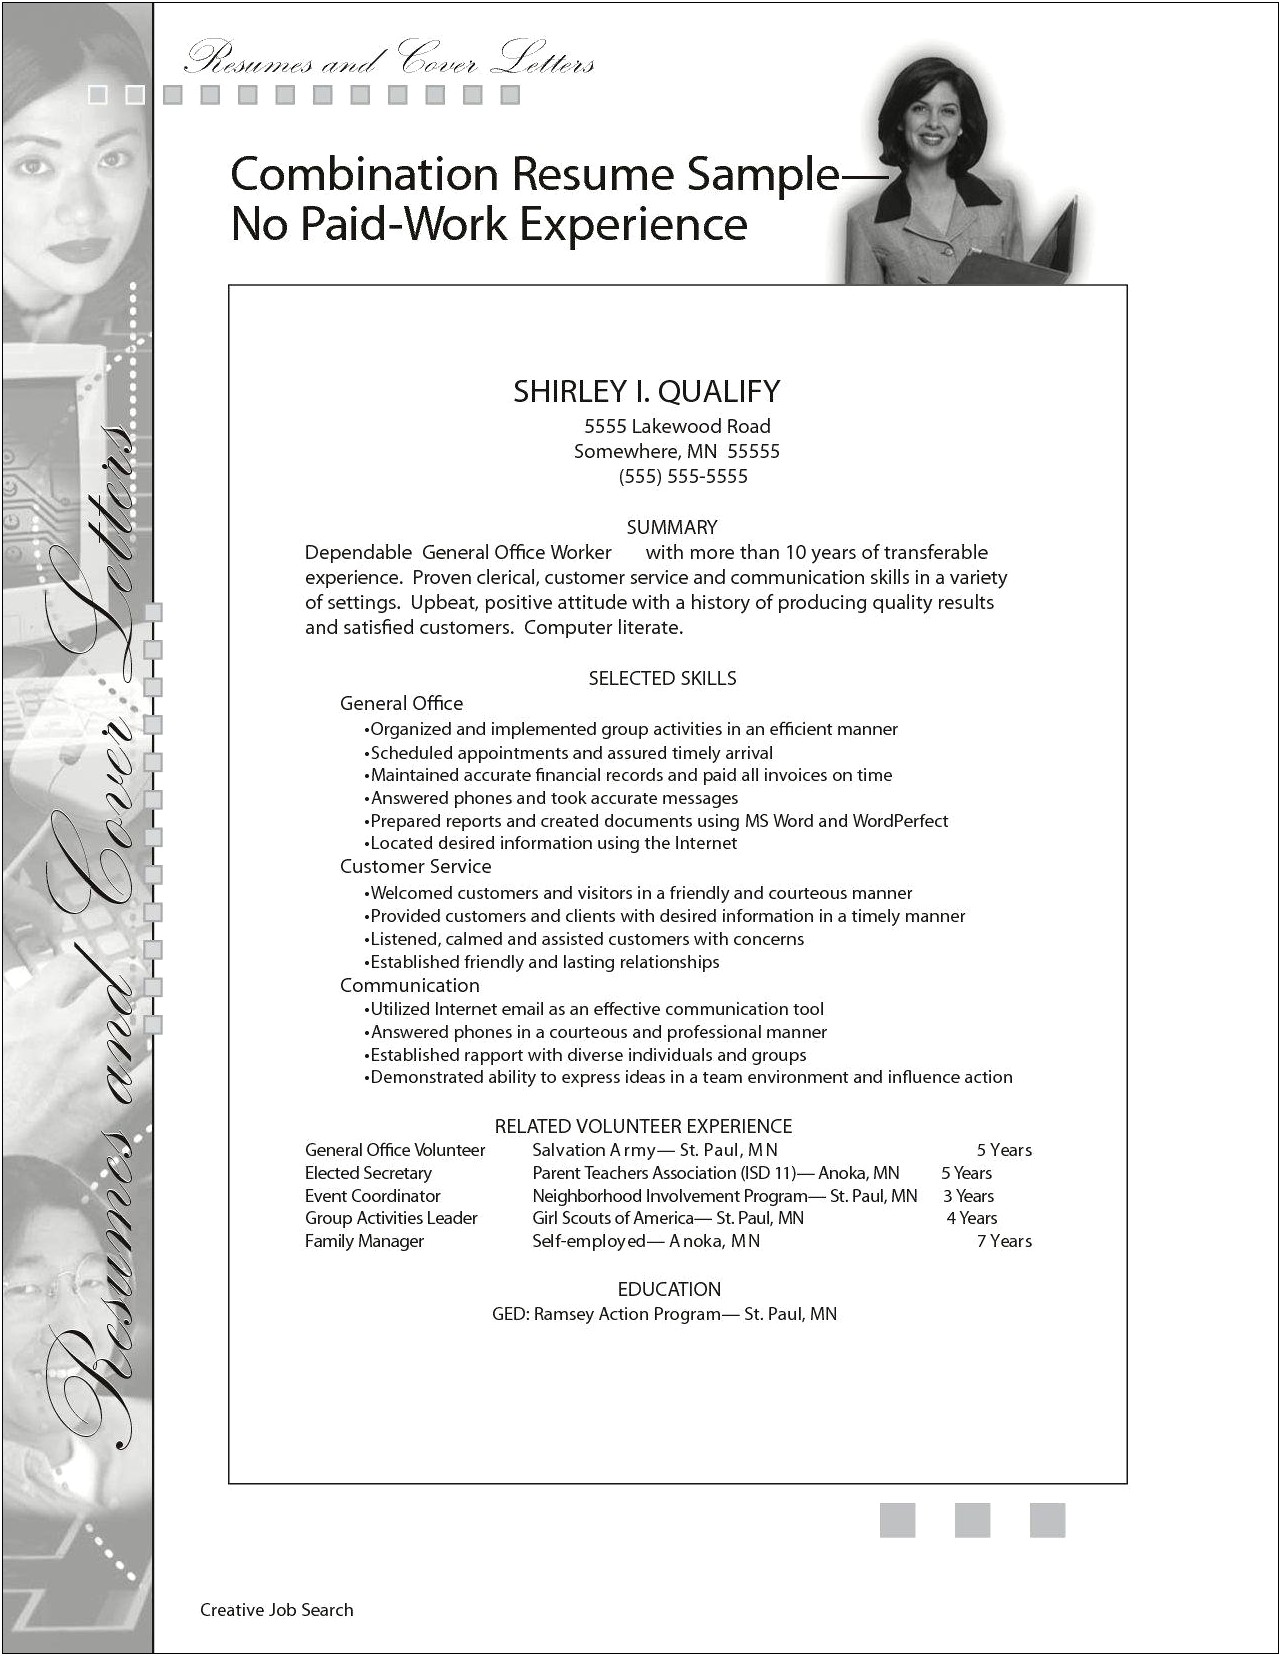 Resumes For People With No Work Experience